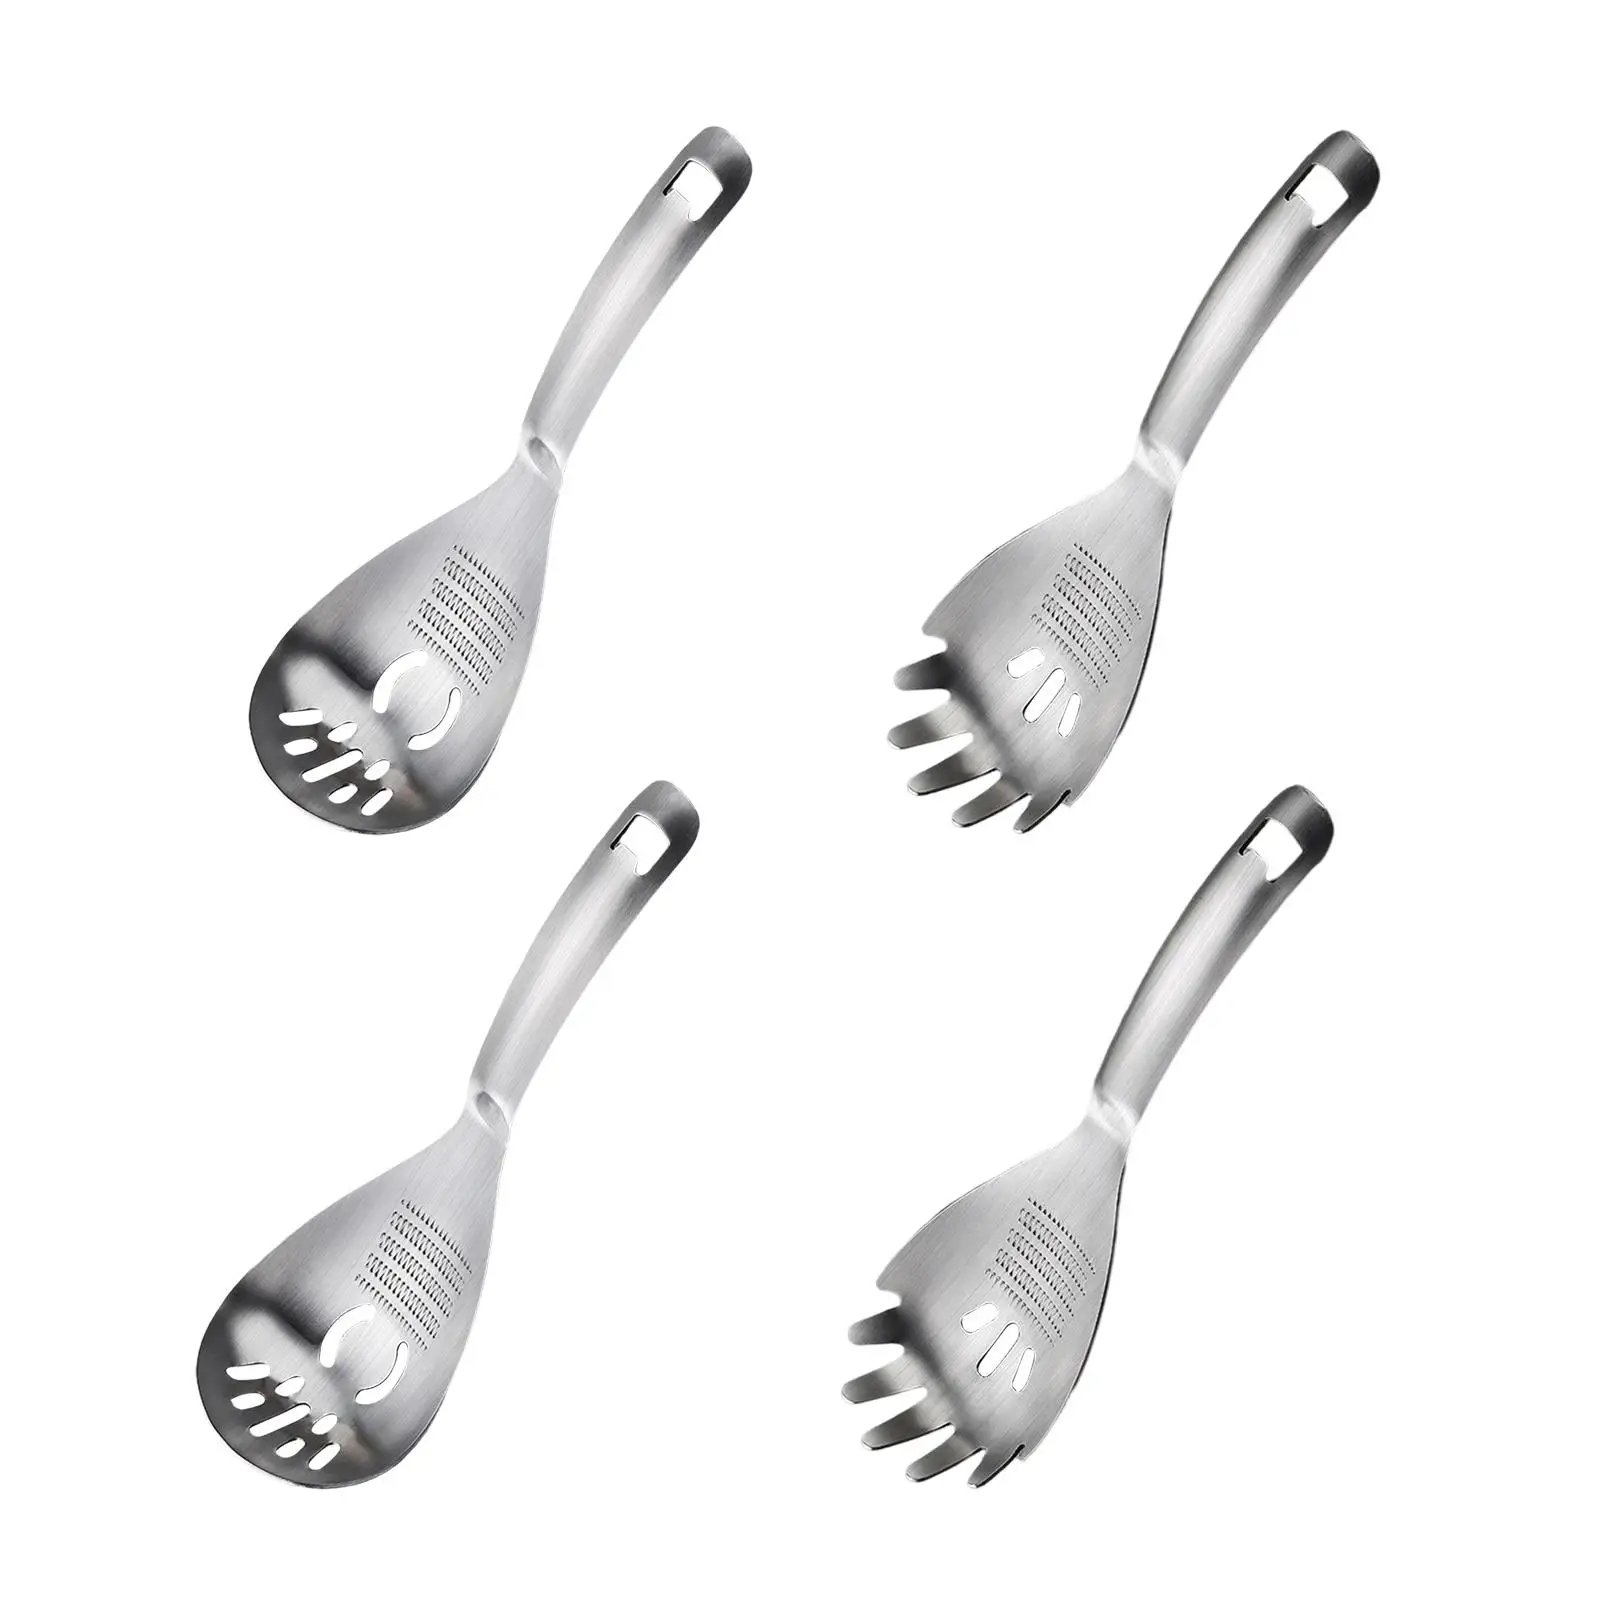 Versatile 304 Stainless Steel Kitchen Slotted Serving Spoon Heat Resistant